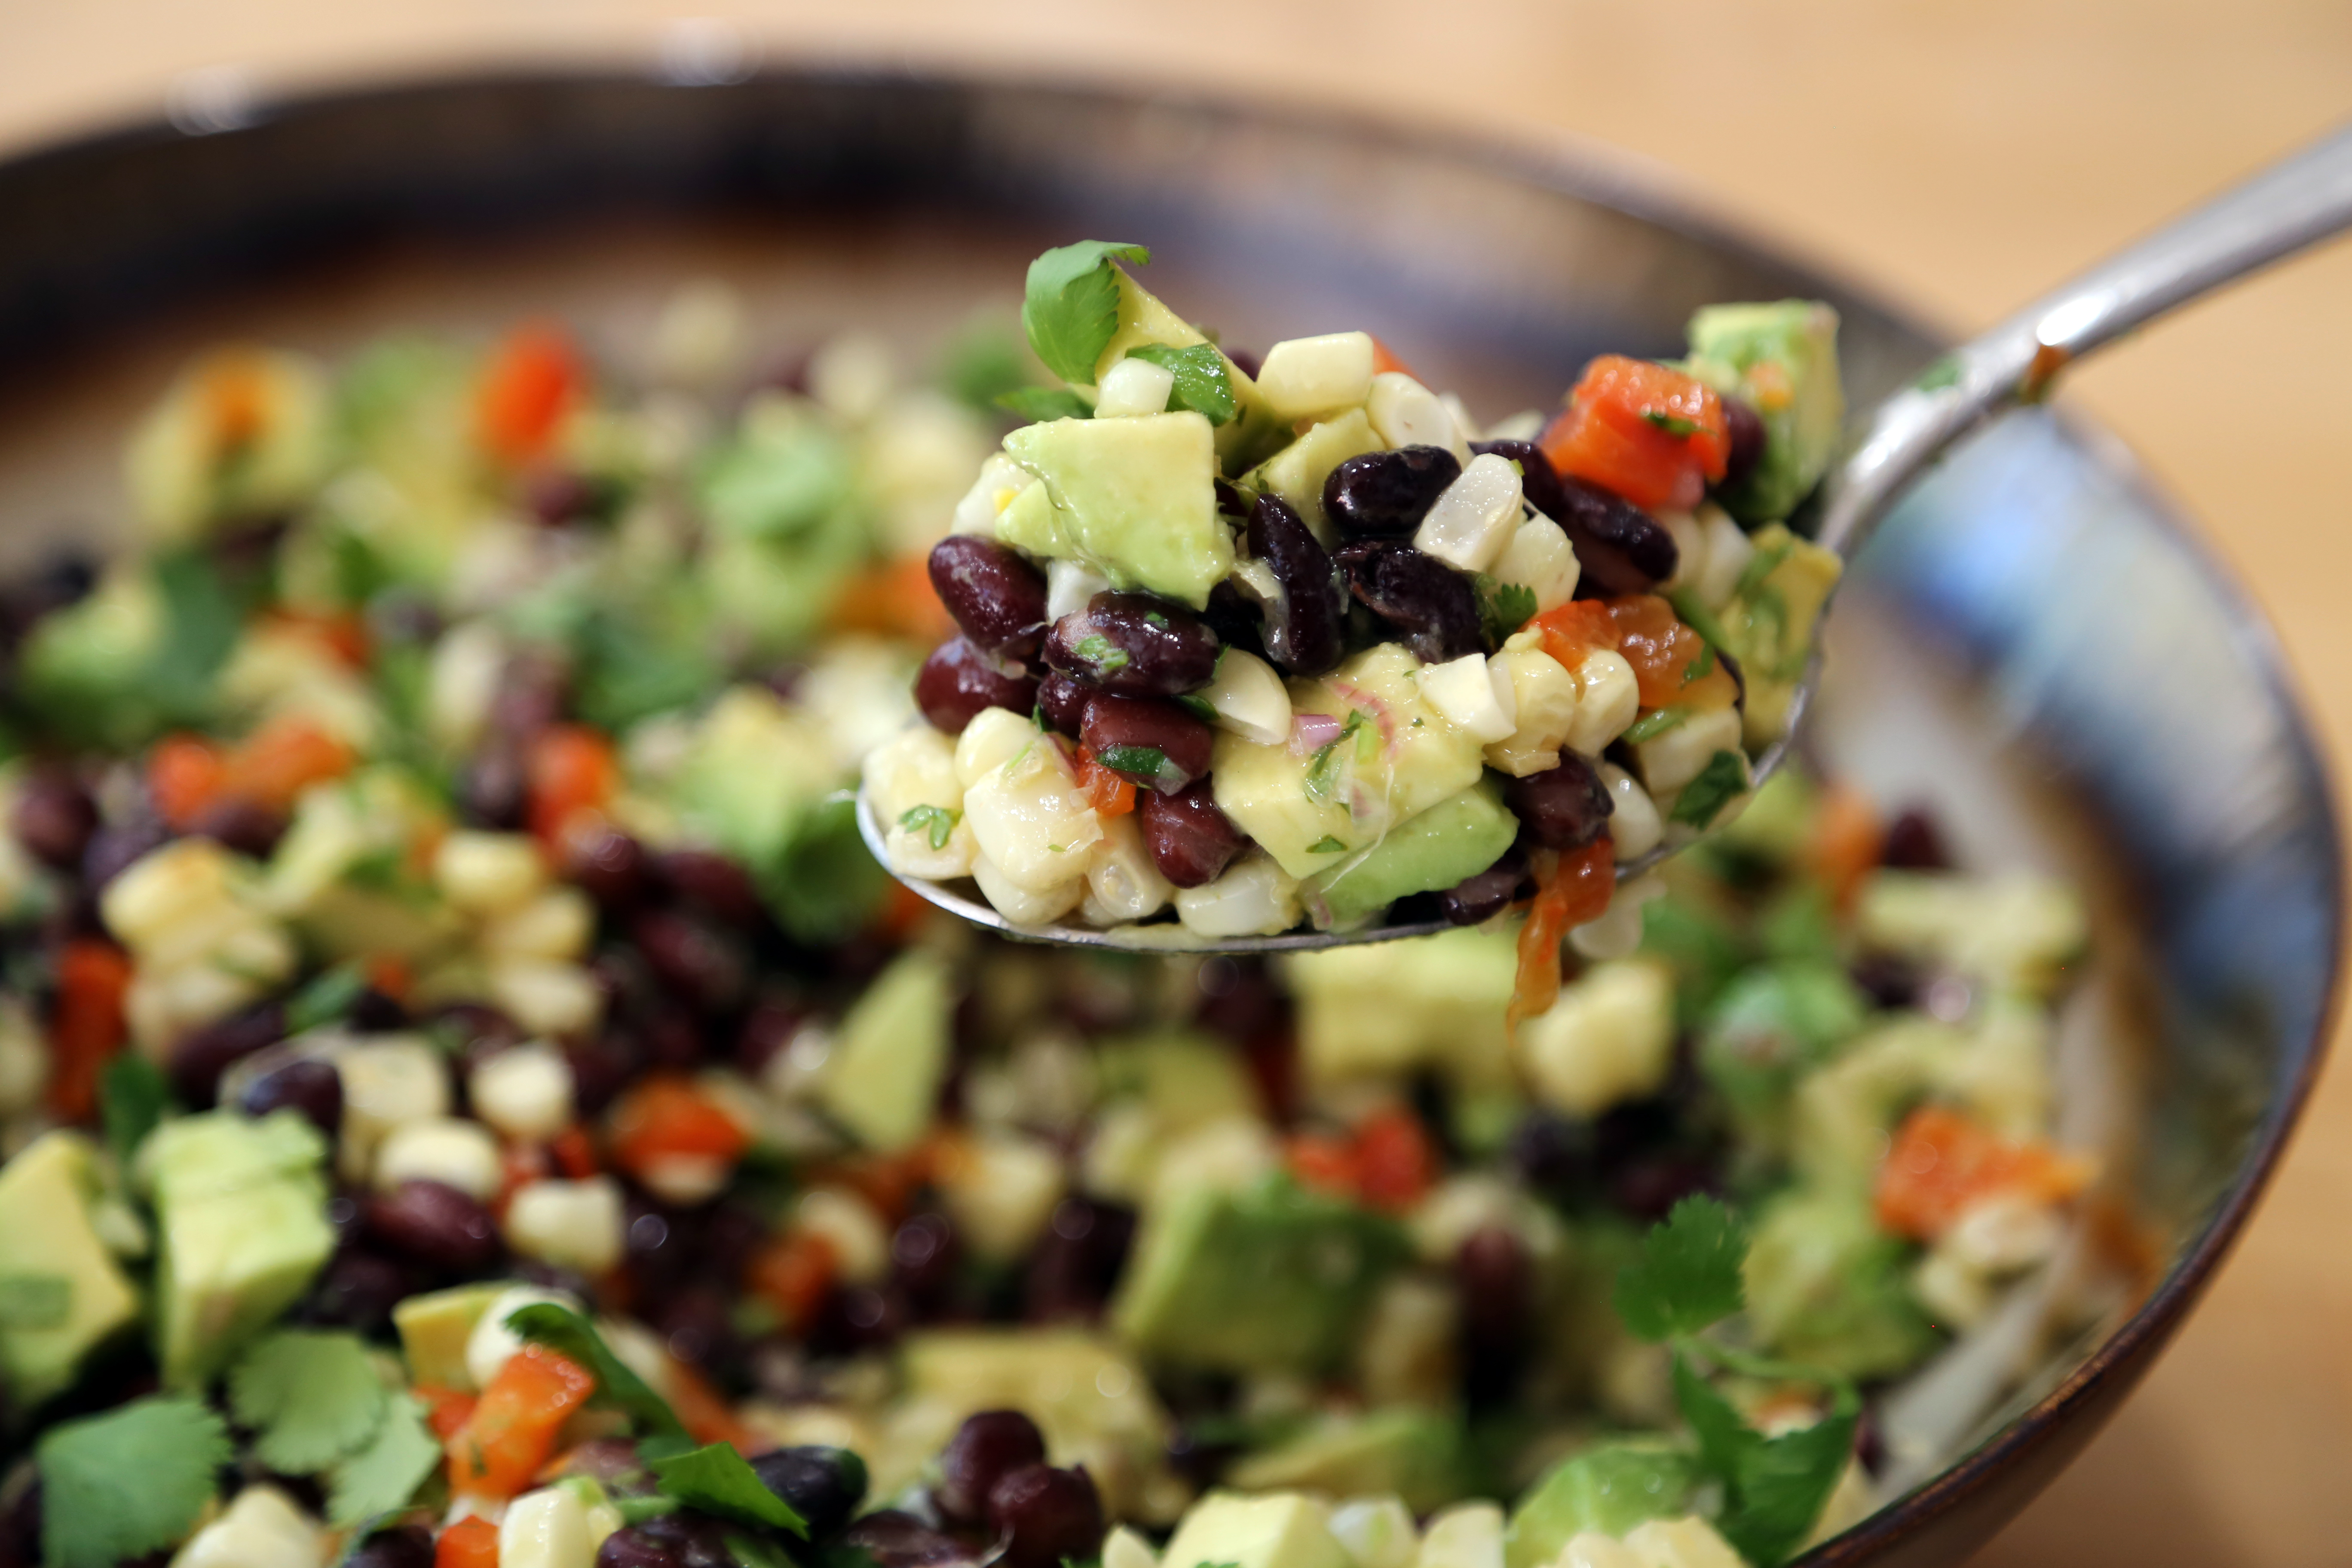 Grilled Corn, Red Pepper, Black Bean and Avocado Salad with Cilantro Vinaigrette